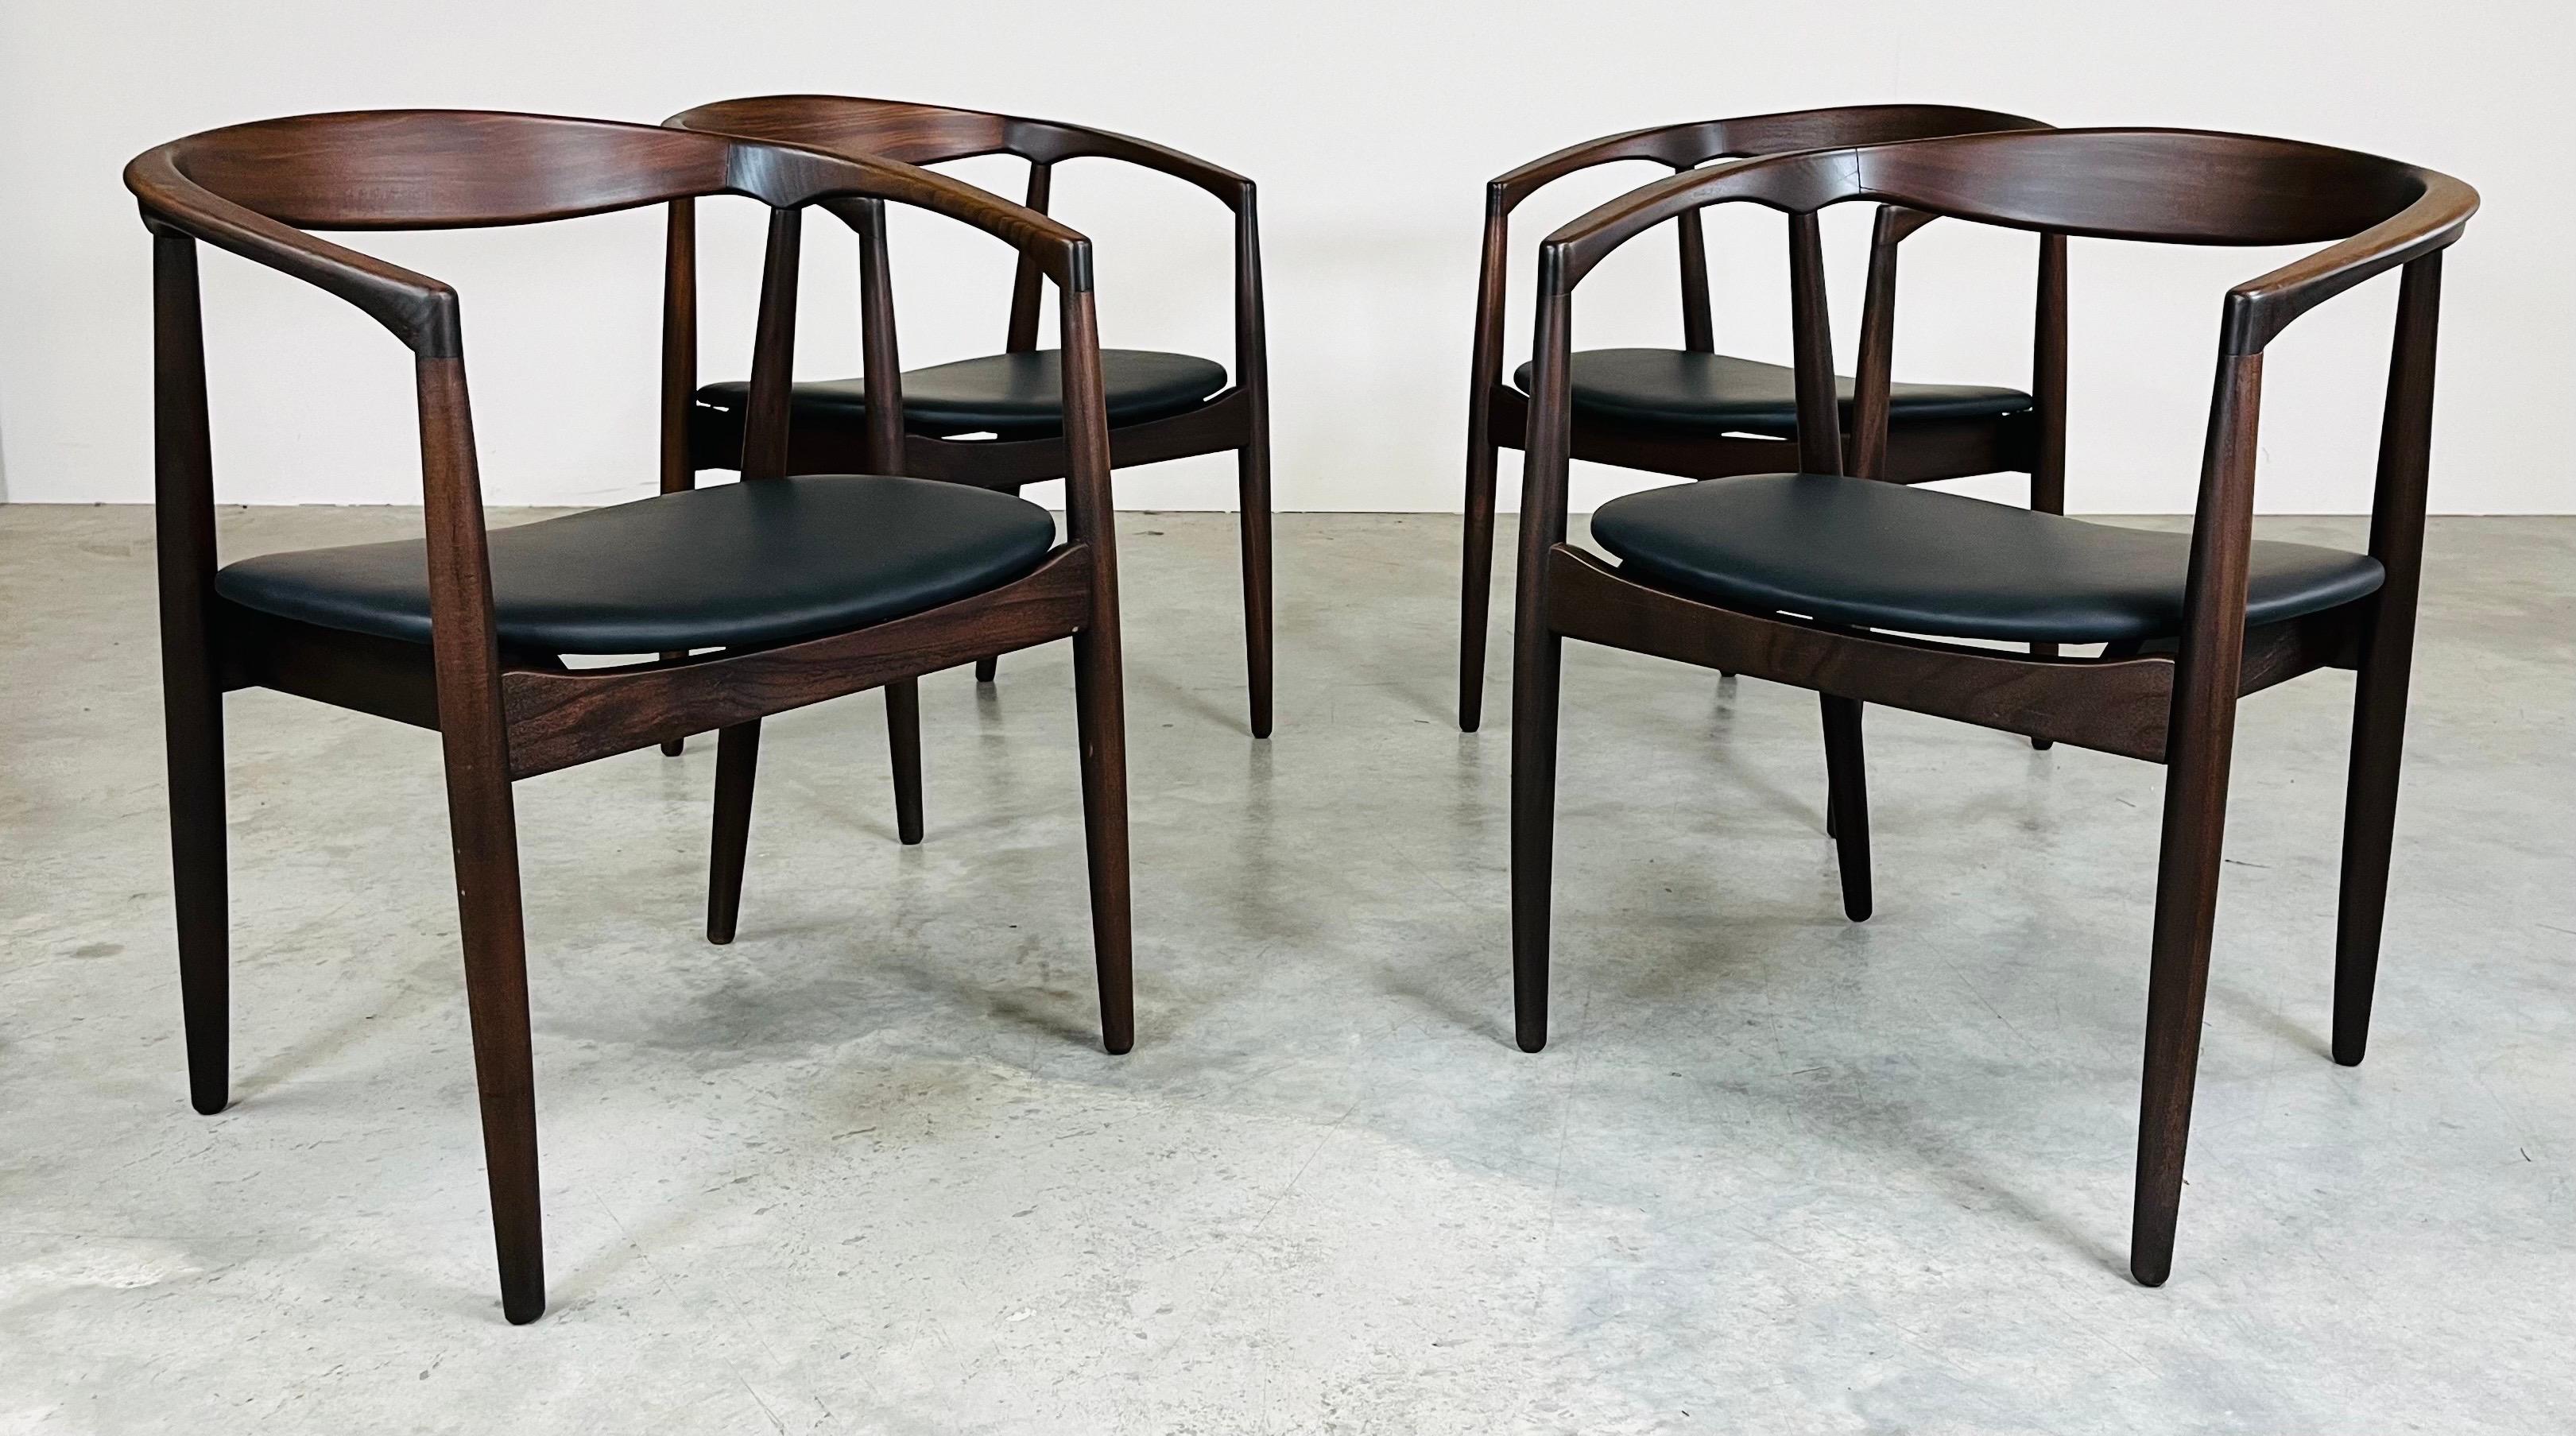 A beautiful set of 4 Kai Kristiansen 'Troja' round chairs. The frames are made from Afromosia African teak wood. Manufactured by Raymor of Denmark circa 1960. 
 In excellent condition having fresh cushioning and durable yet soft high end stain proof